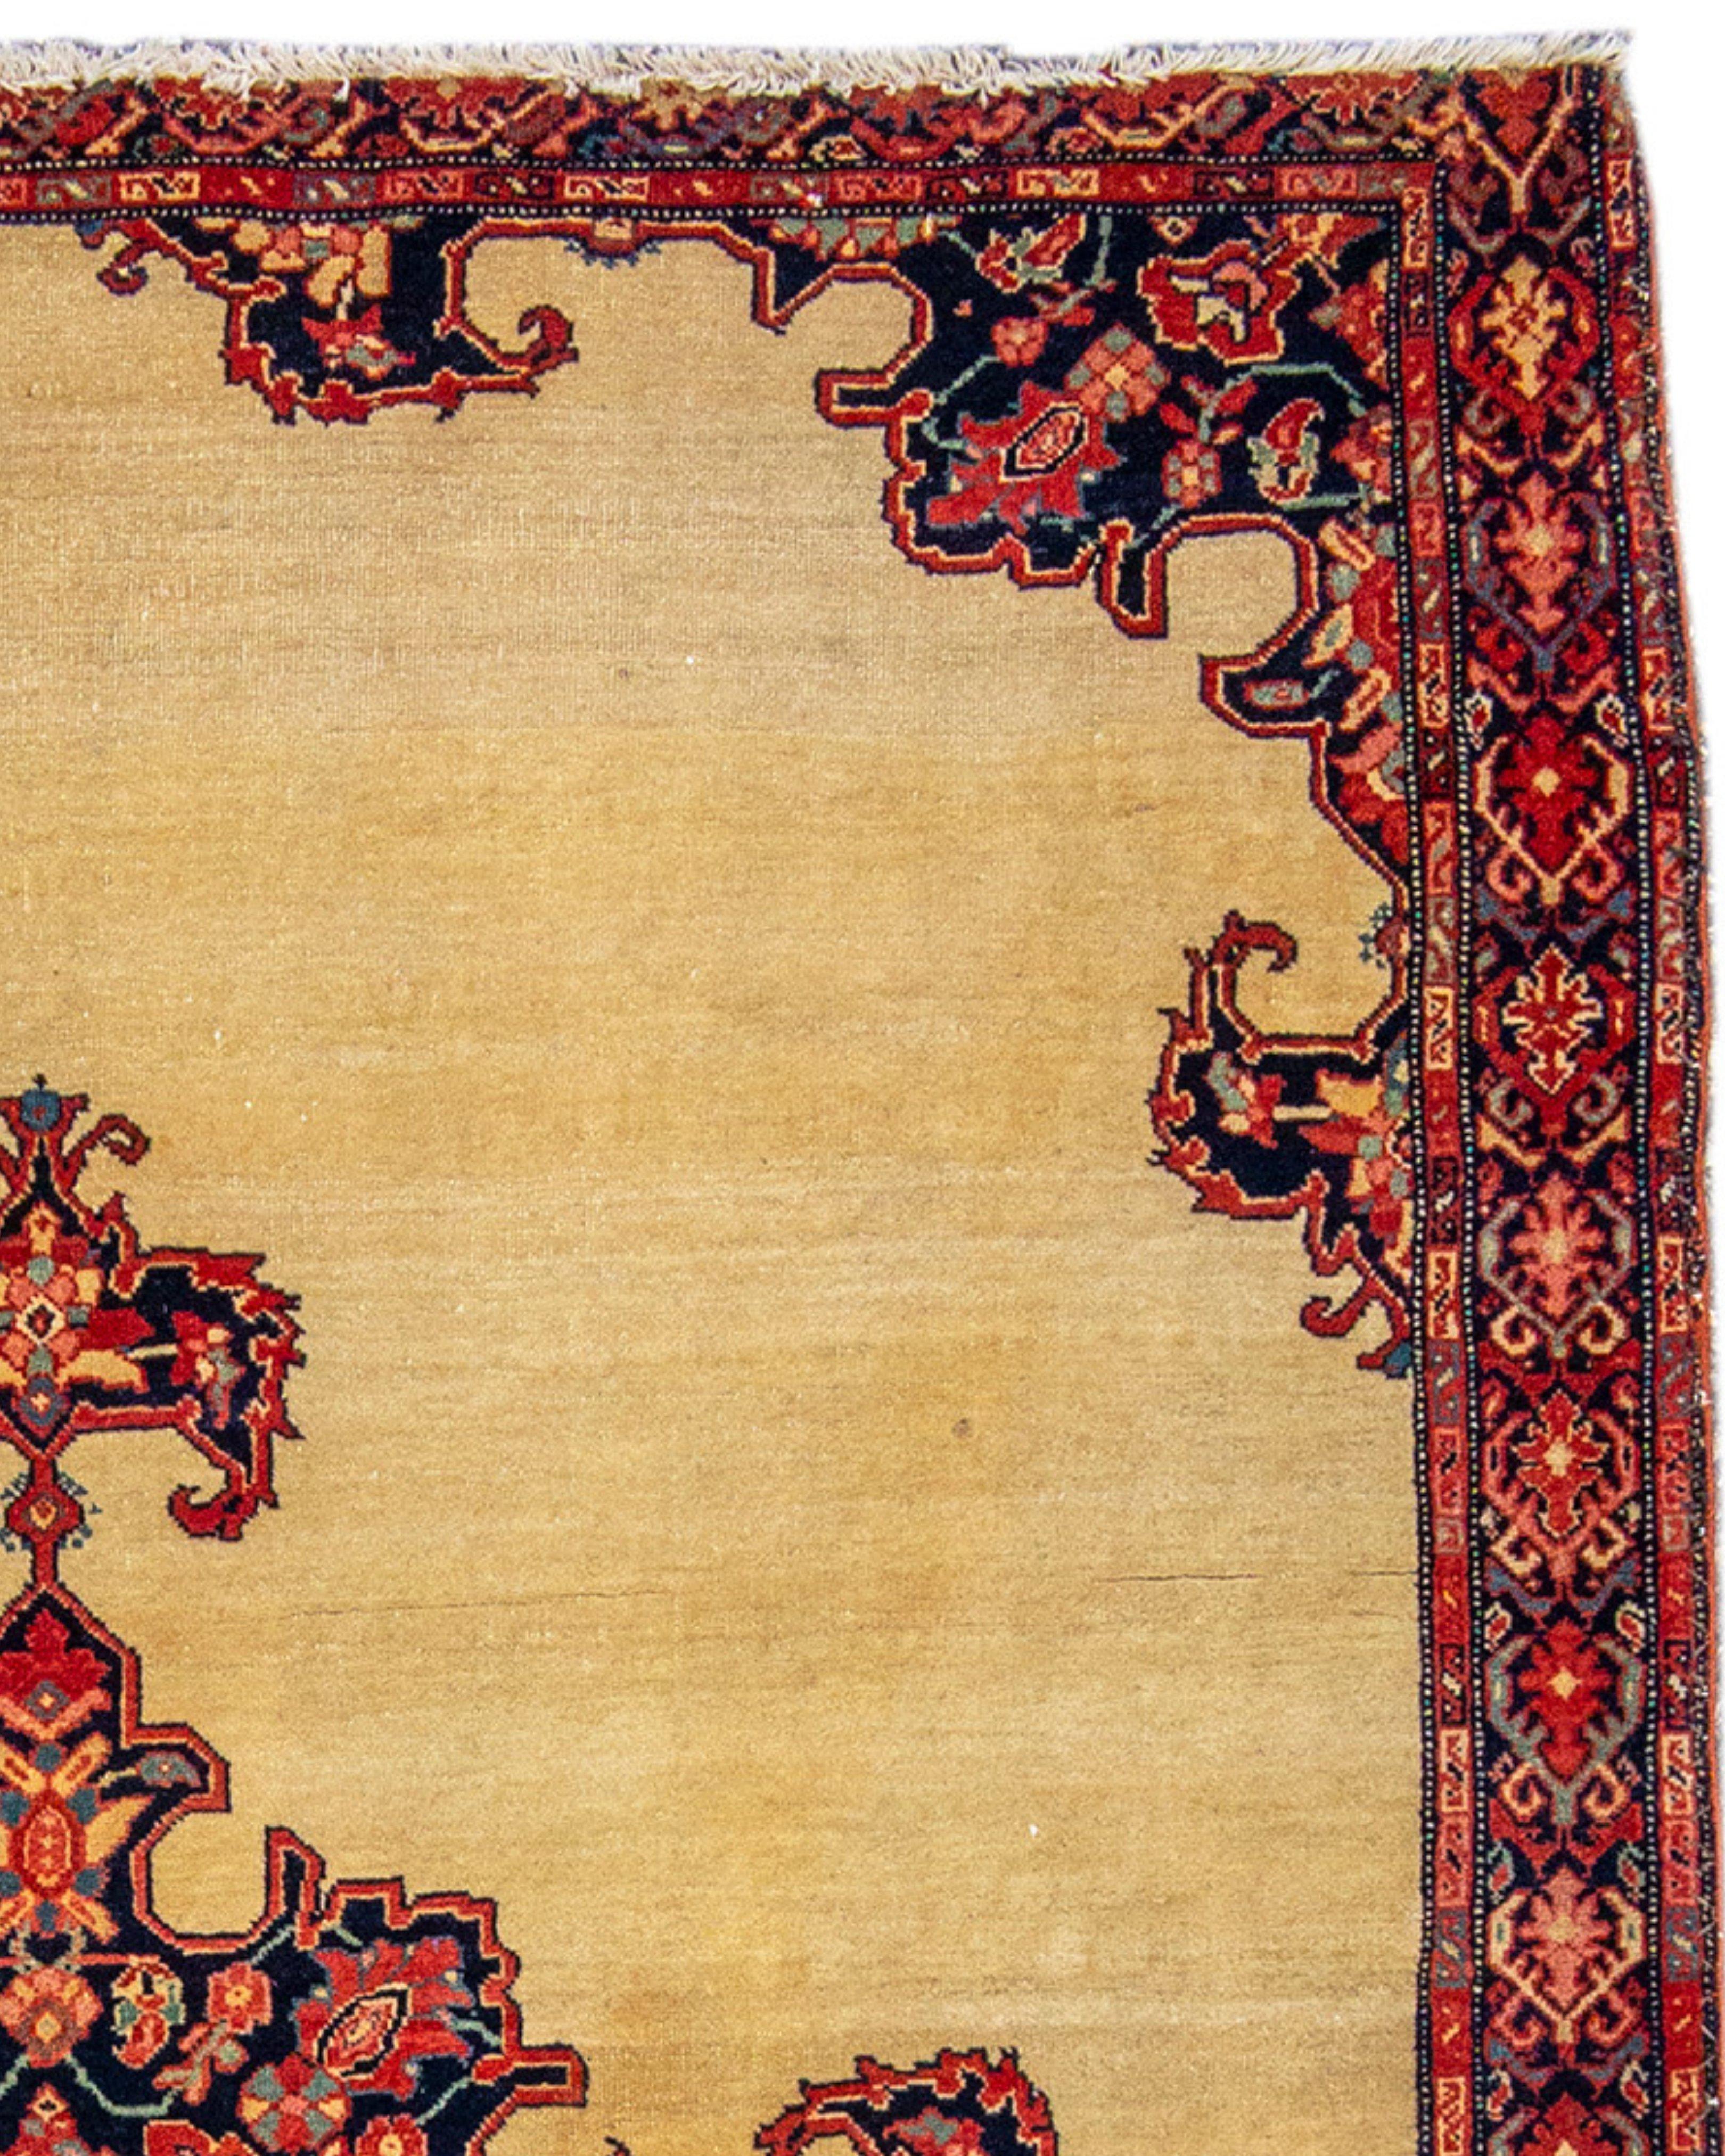 Antique Persian Fereghan Sarouk Rug, 19th Century

Additional Information:
Dimensions: 3'6